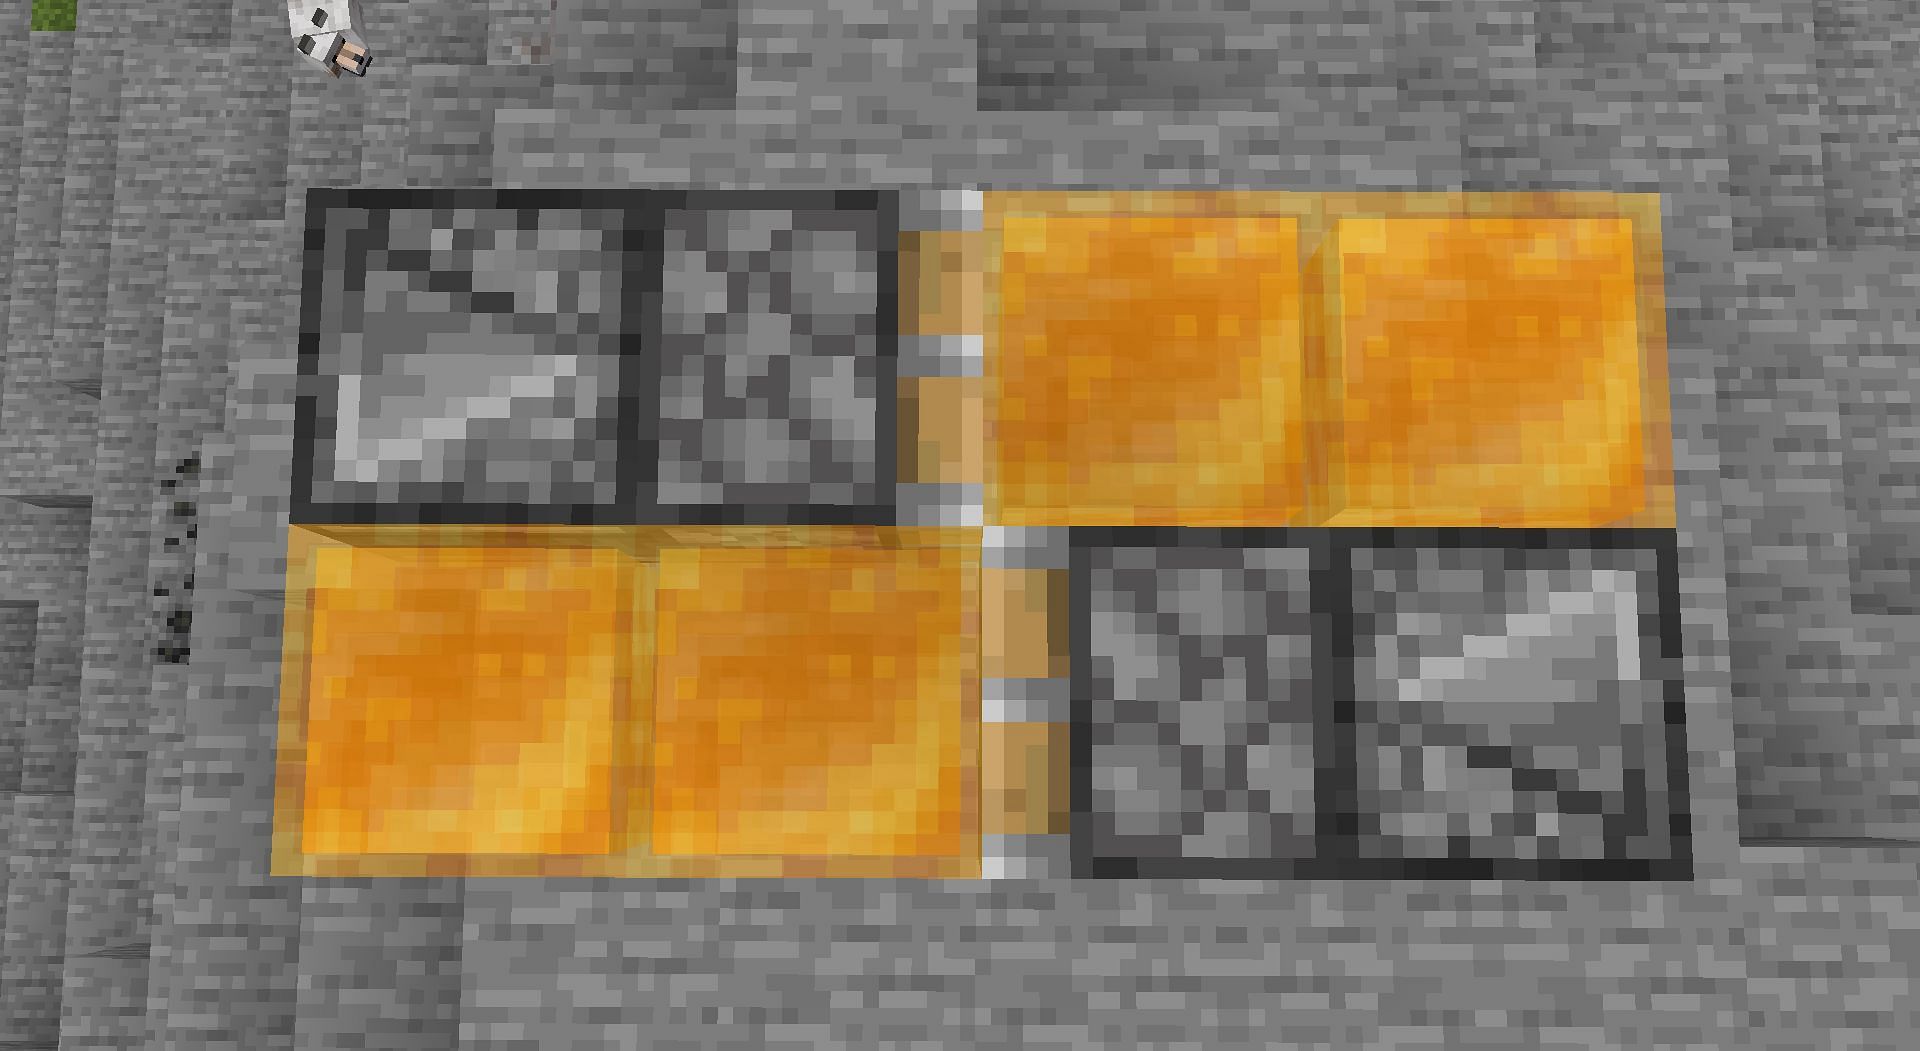 Pistons, observers, and honey blocks make a simple flying machine (Image via Minecraft 1.19 update)